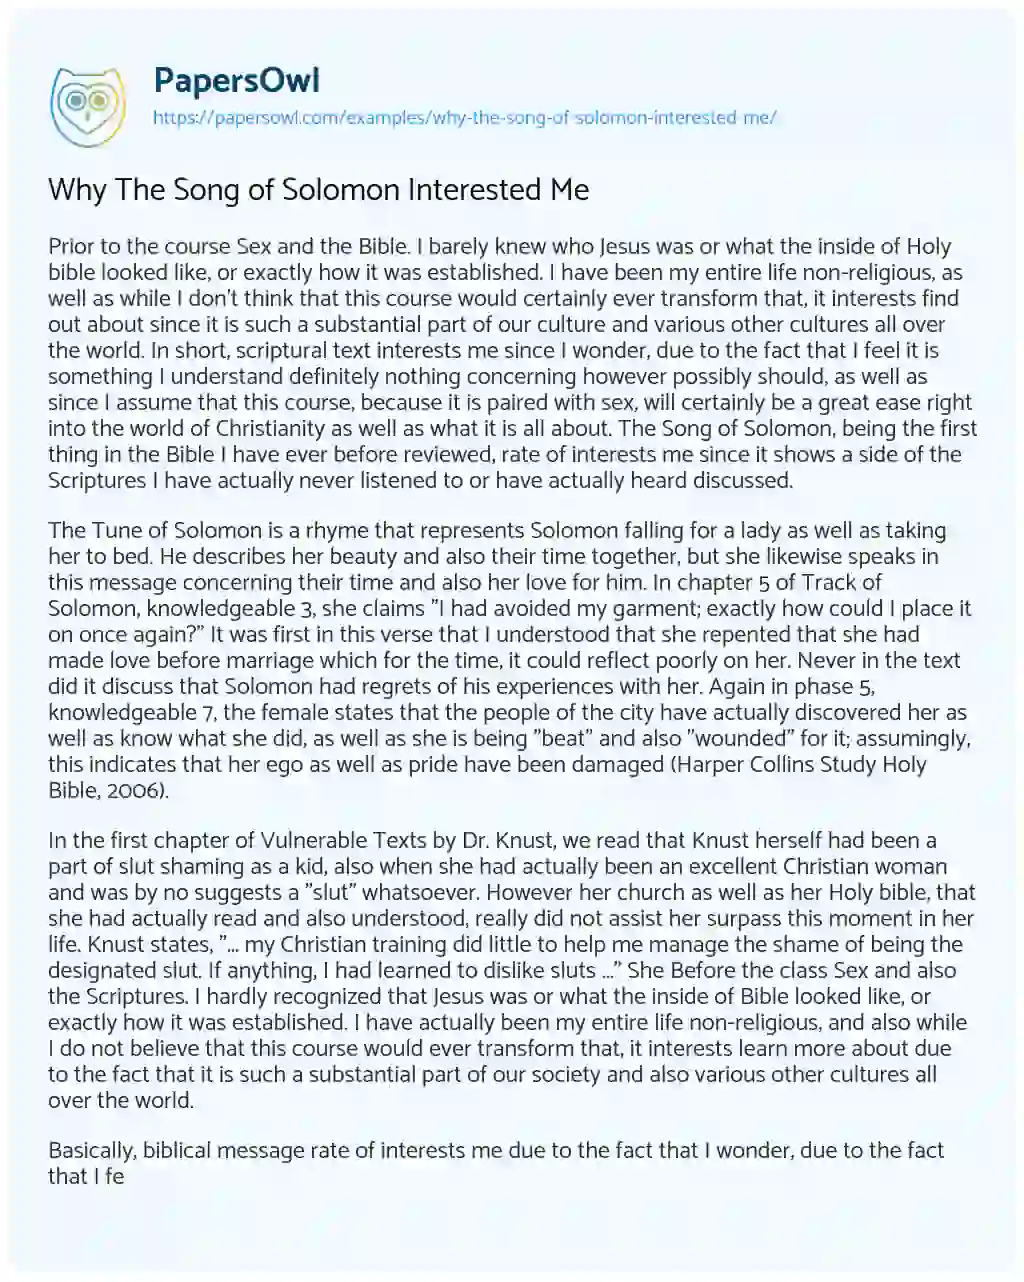 Essay on Why the Song of Solomon Interested me